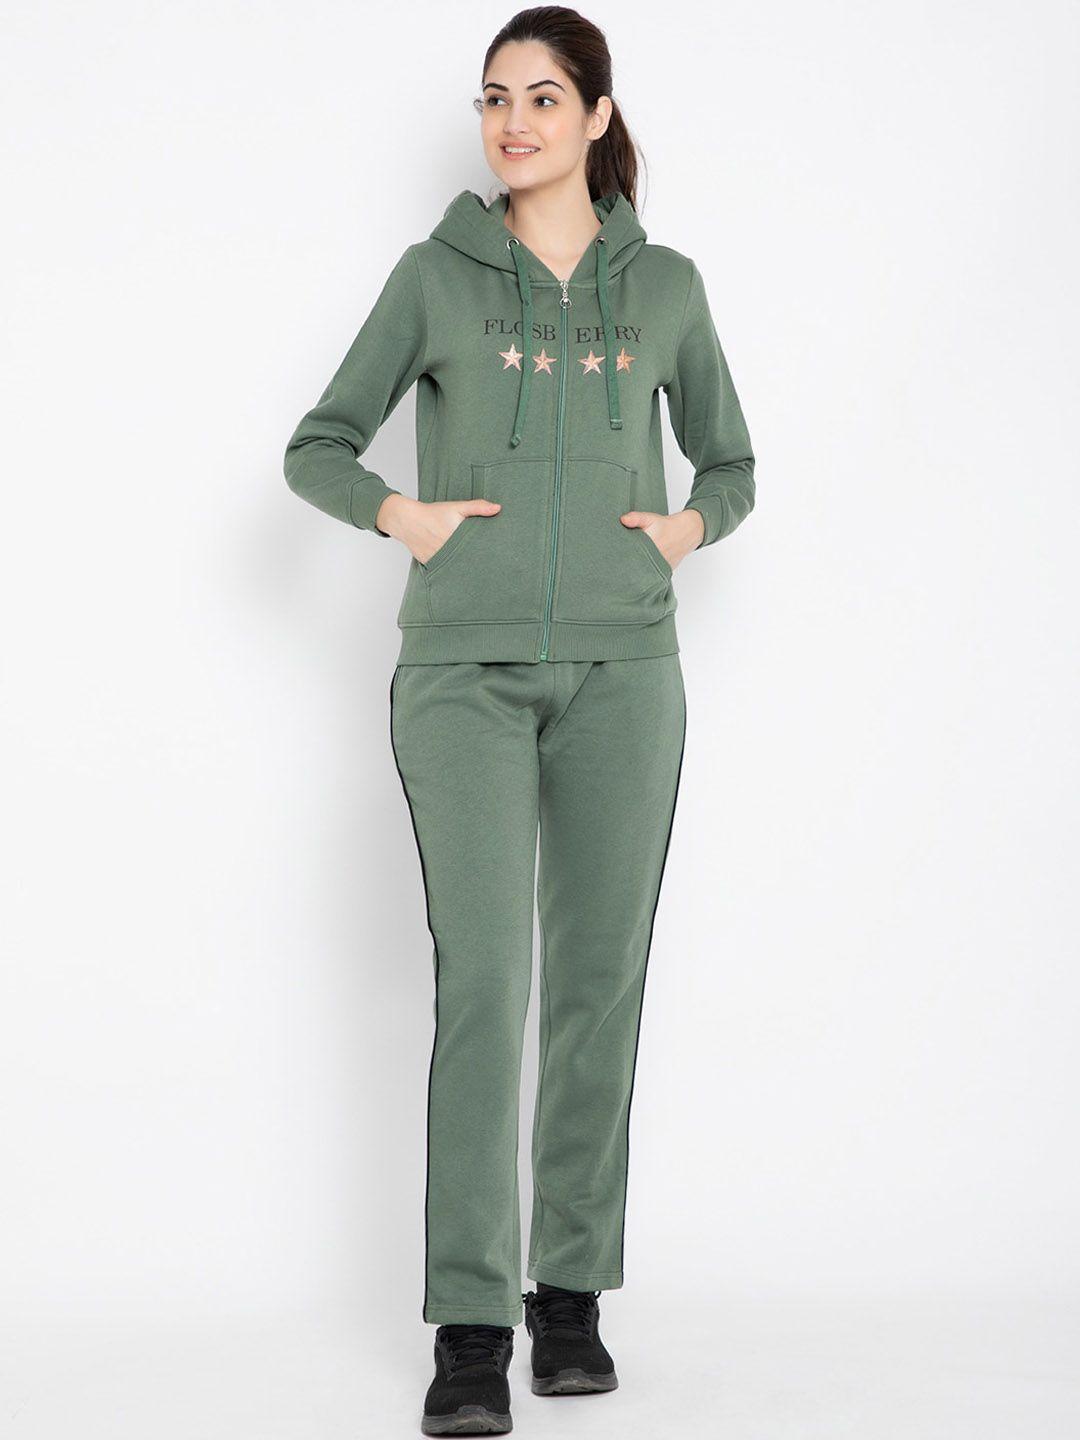 flosberry women olive green printed cotton tracksuits